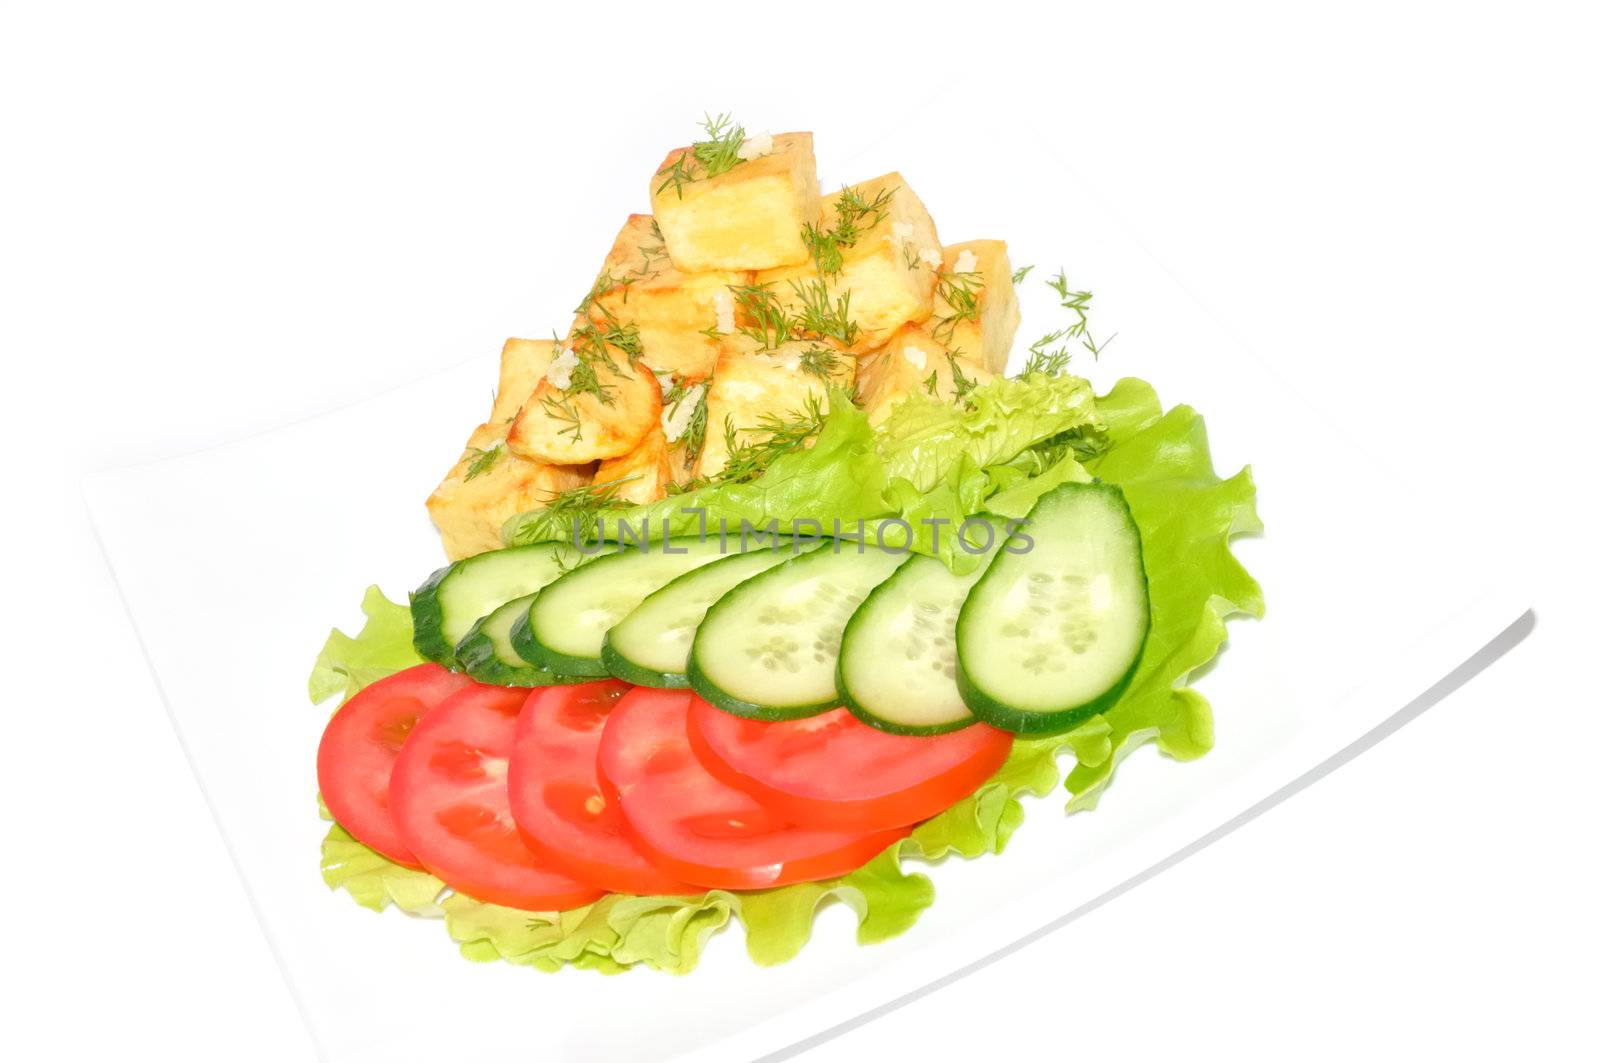  Potato country style with dill and garlic, fresh vegetables on white background